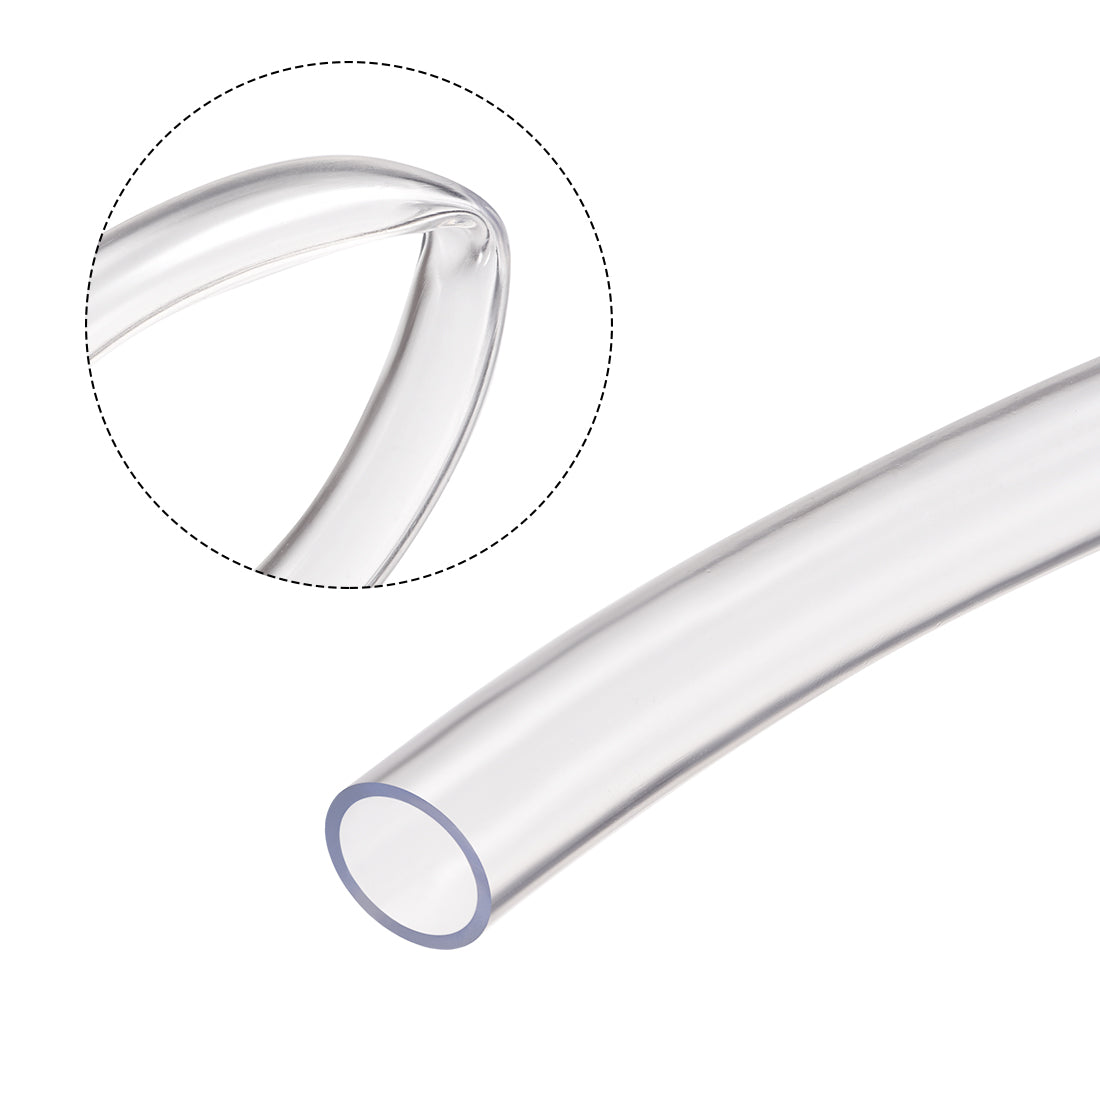 uxcell Uxcell PVC Vinyl Tubing Plastic Tube Flexible Water Pipes